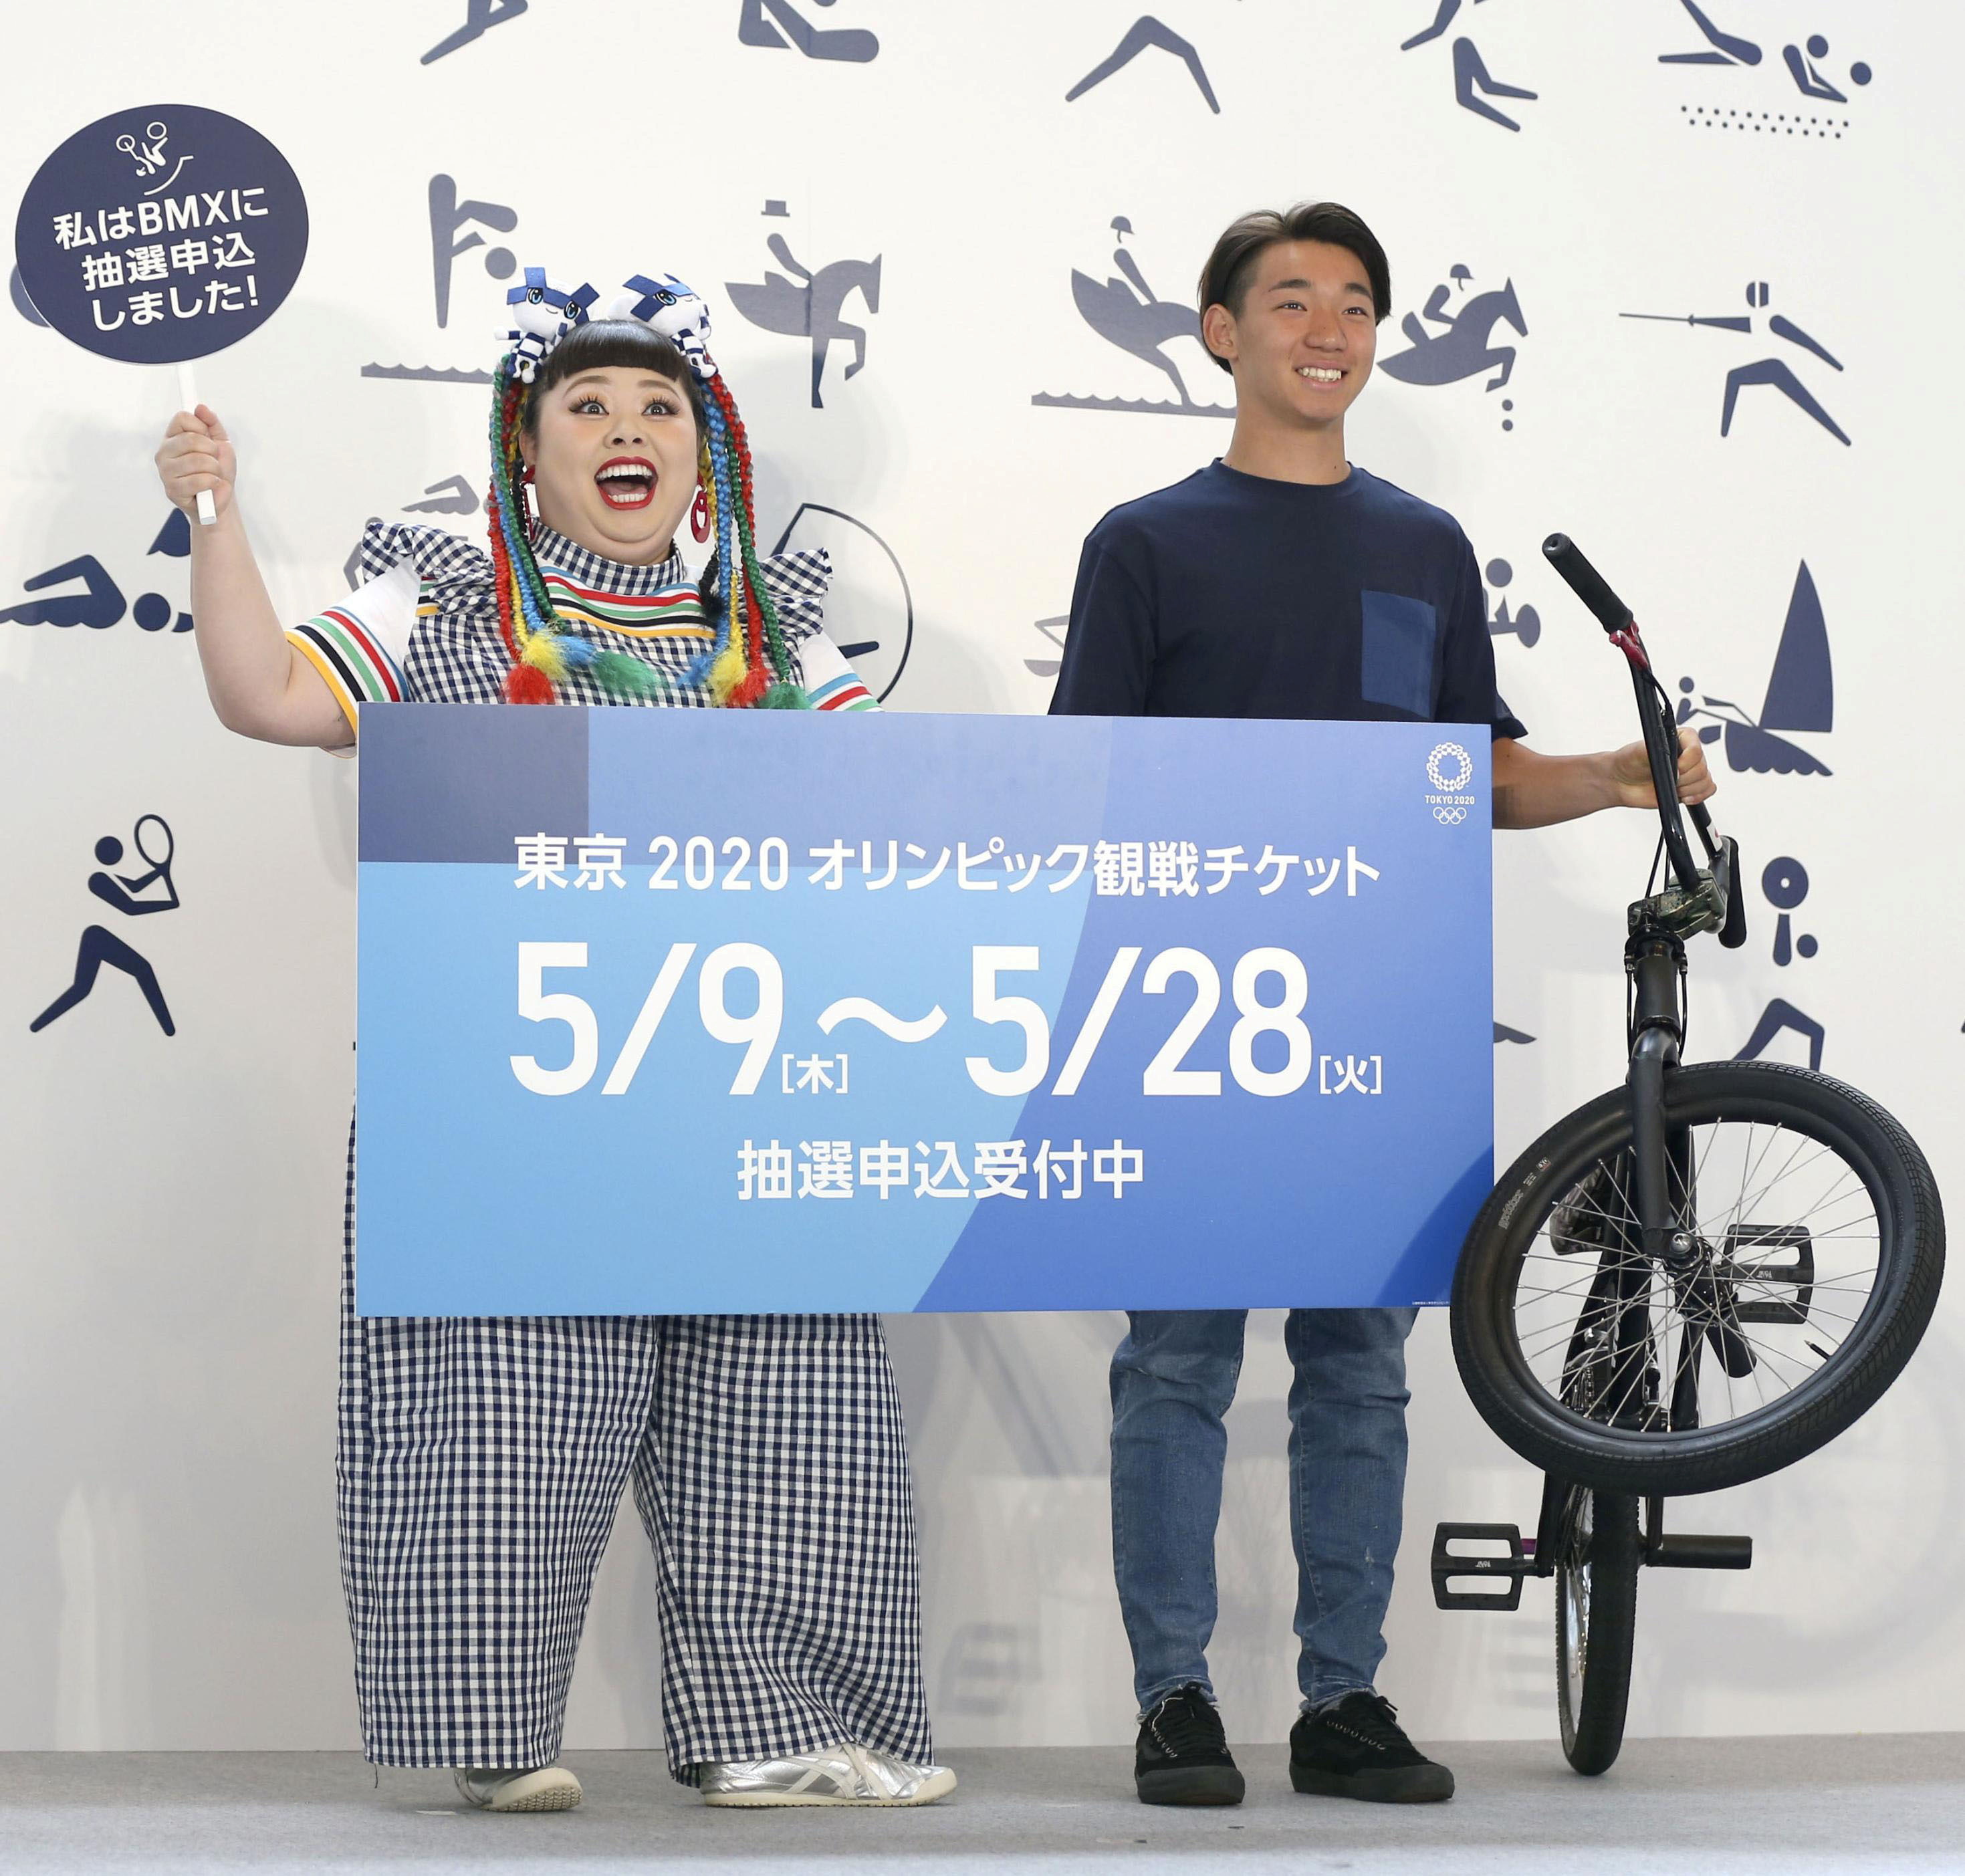 Naomi Watanabe poses with BMX rider Rimu Nakamura at an event to promote the application process for tickets for the Tokyo 2020 Olympic Games in Tokyo, Japan, in this photo taken by Kyodo in May 9, 2019.  Mandatory credit Kyodo/via REUTERS ATTENTION EDITORS - THIS IMAGE WAS PROVIDED BY A THIRD PARTY. MANDATORY CREDIT. JAPAN OUT. NO COMMERCIAL OR EDITORIAL SALES IN JAPAN.